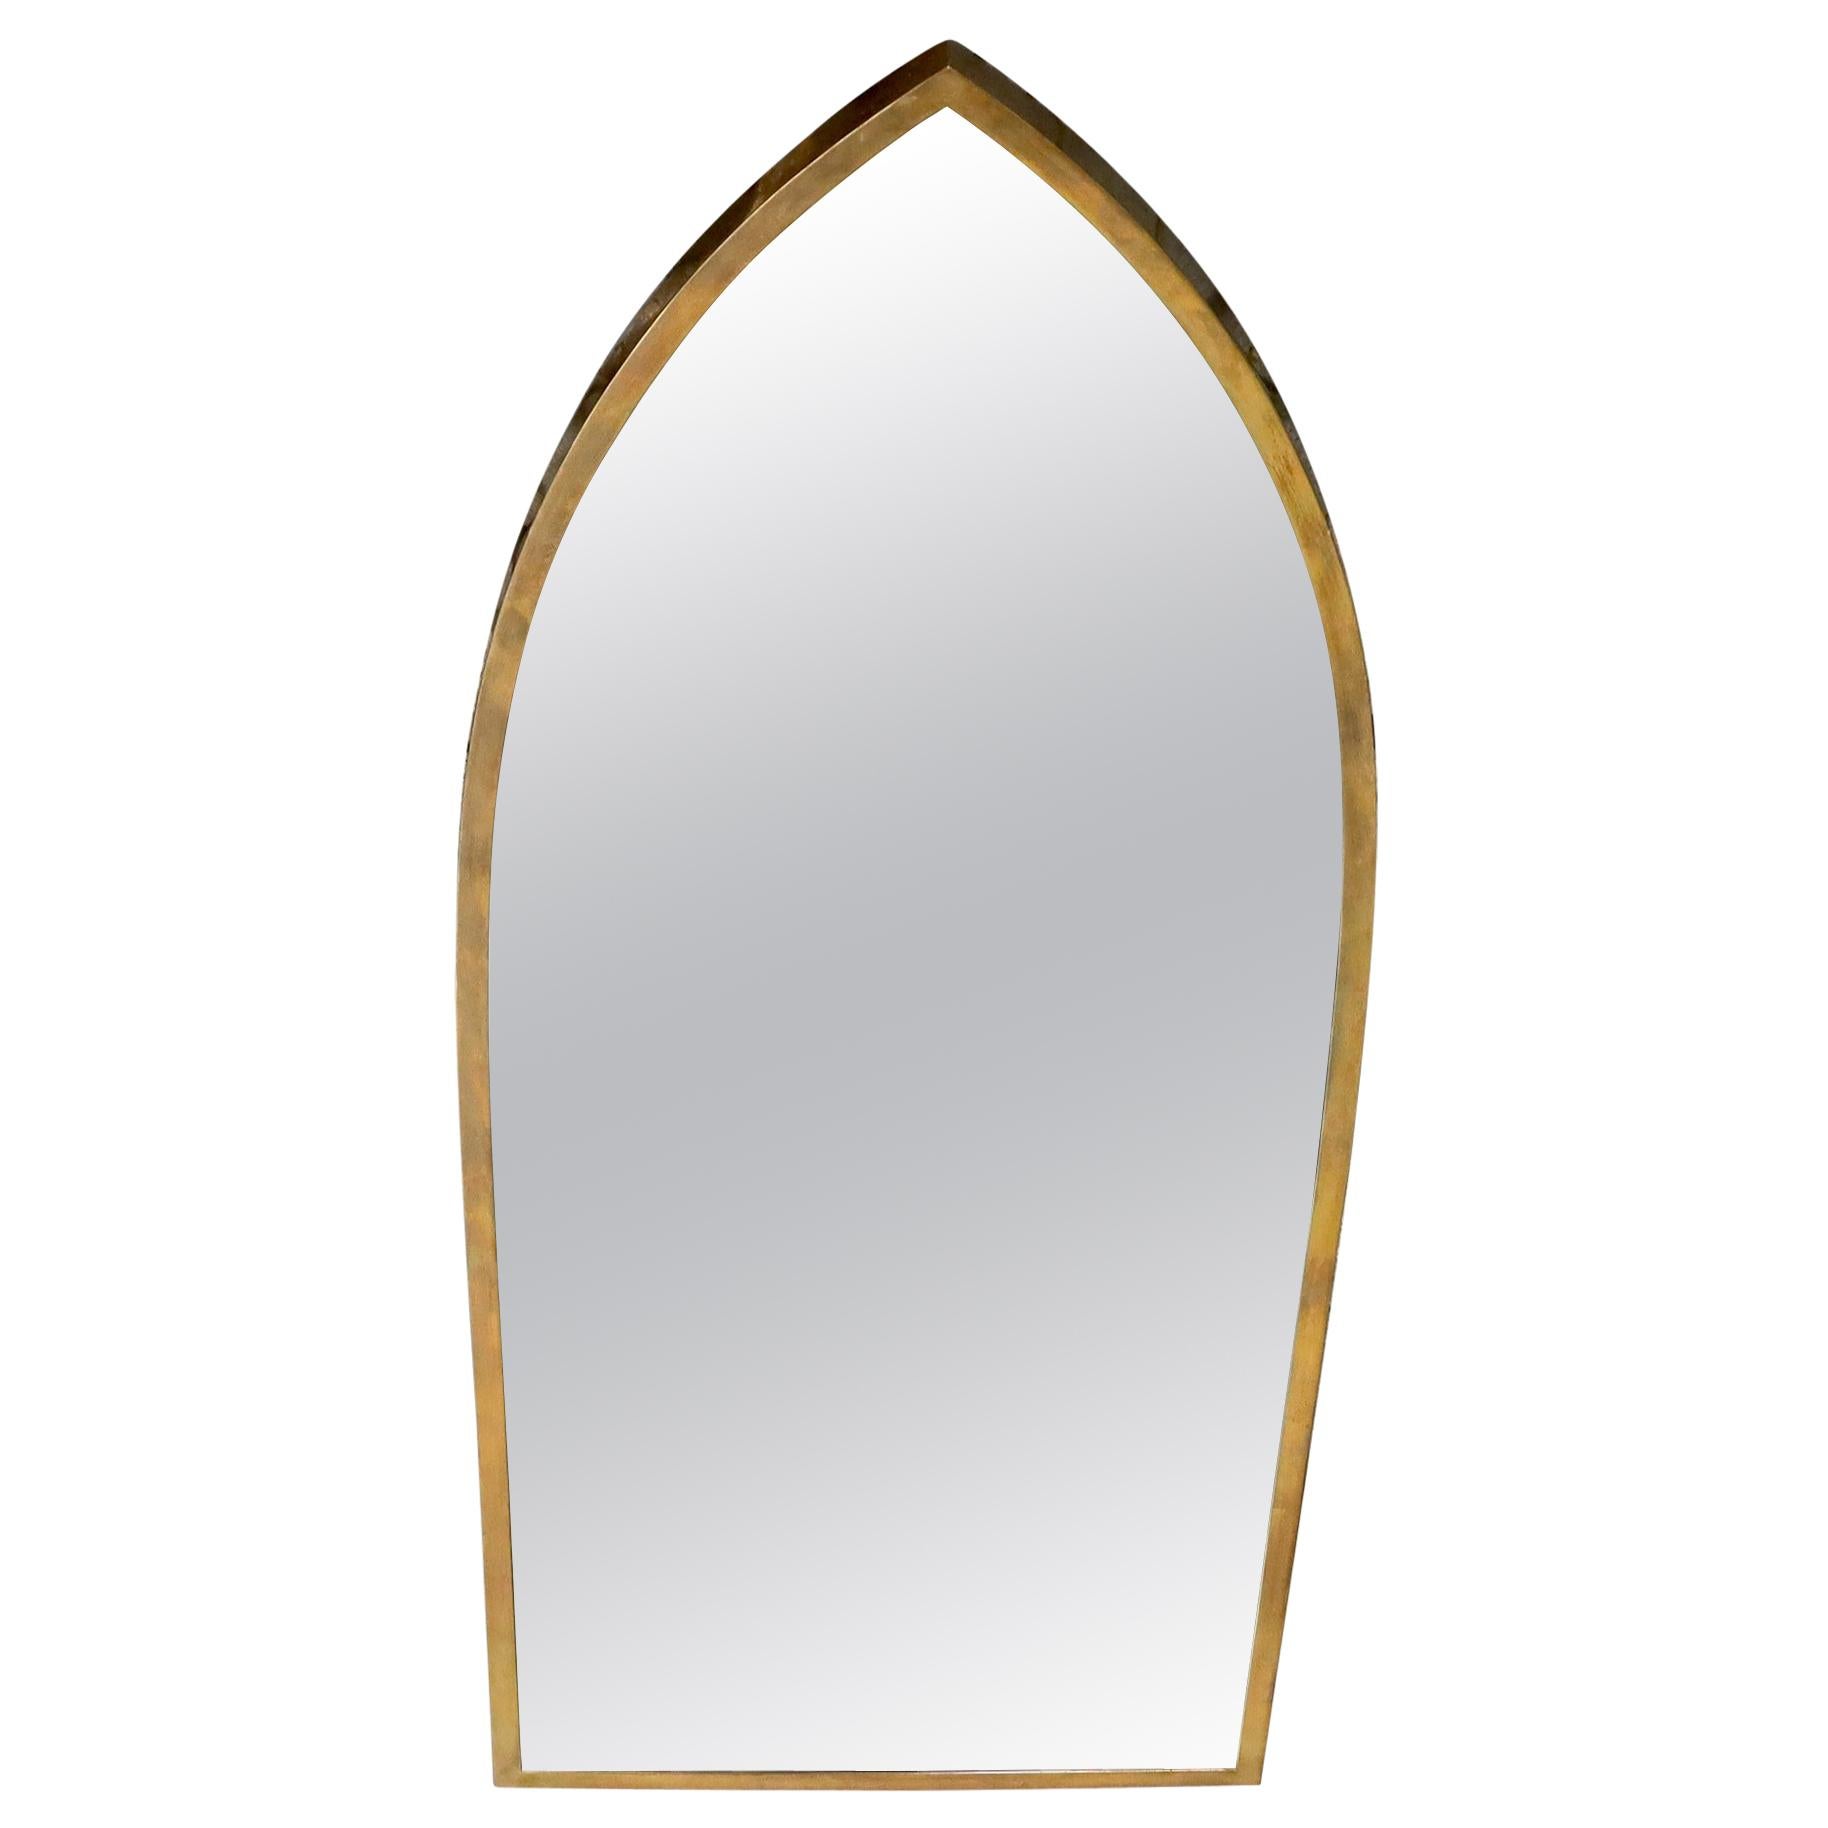 Solid Brass Profile Dome Shield Shape Curved Wall Mirror For Sale